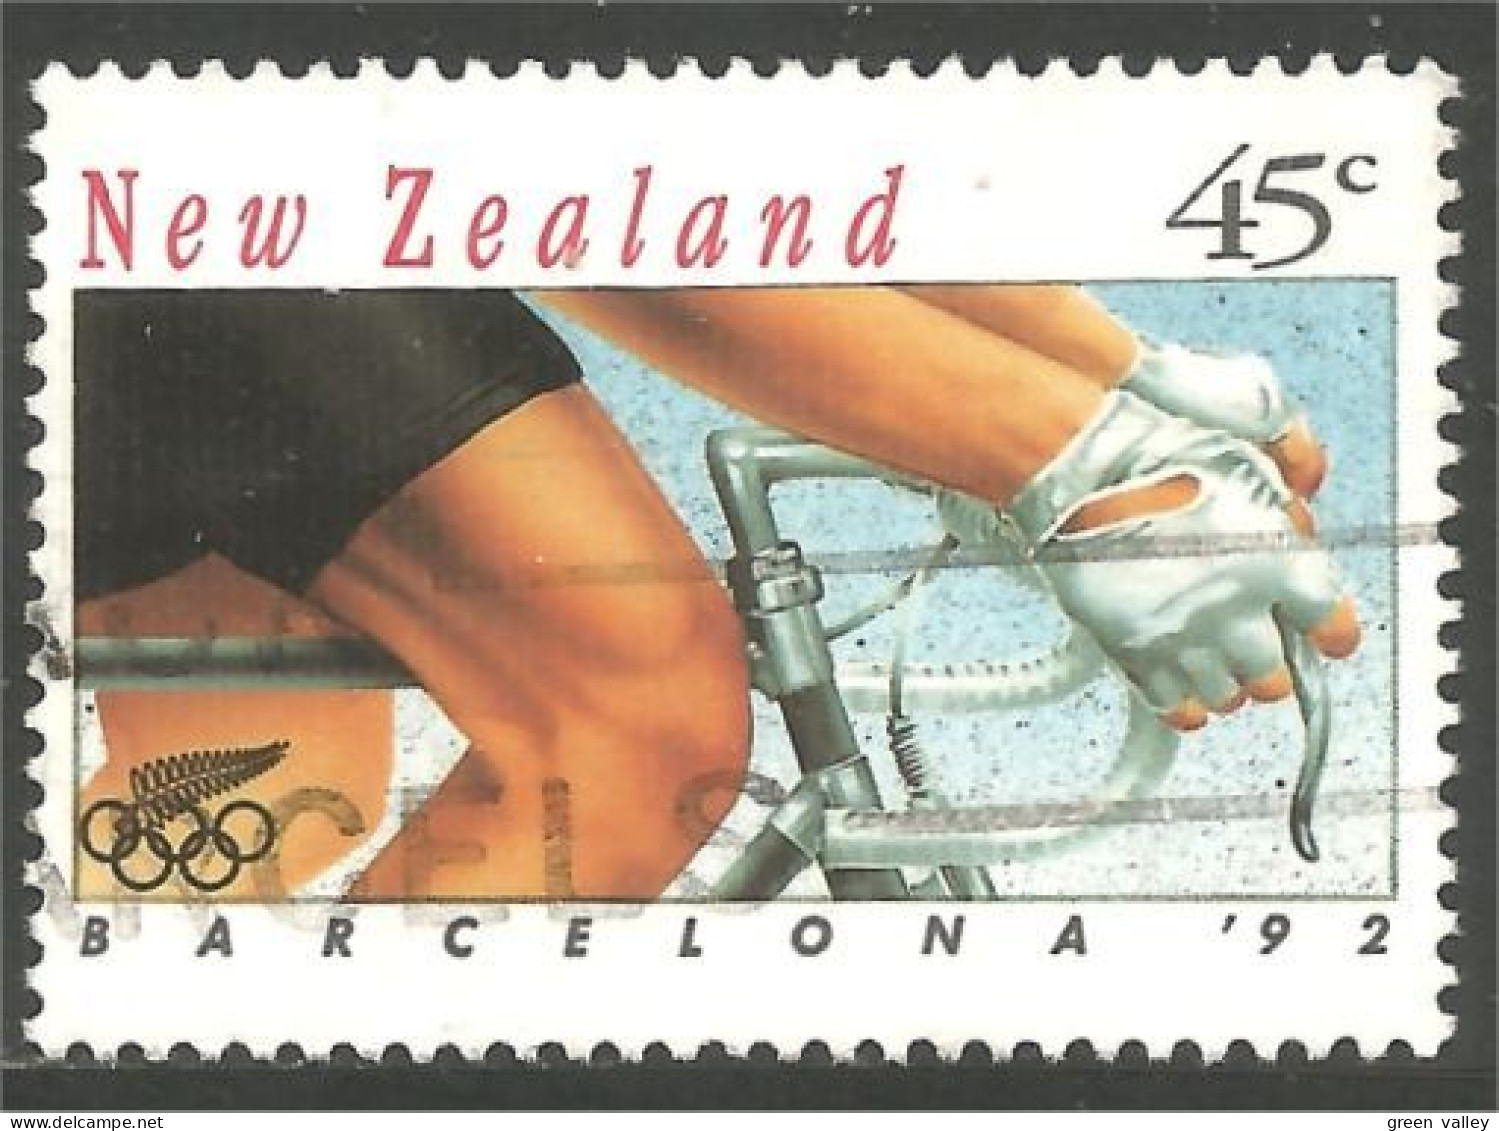 706 New Zealand Olympiques Barcelone Cycling Bicycle Race Fahrrad Bicyclette Vélo Cyclisme (NZ-155e) - Usados